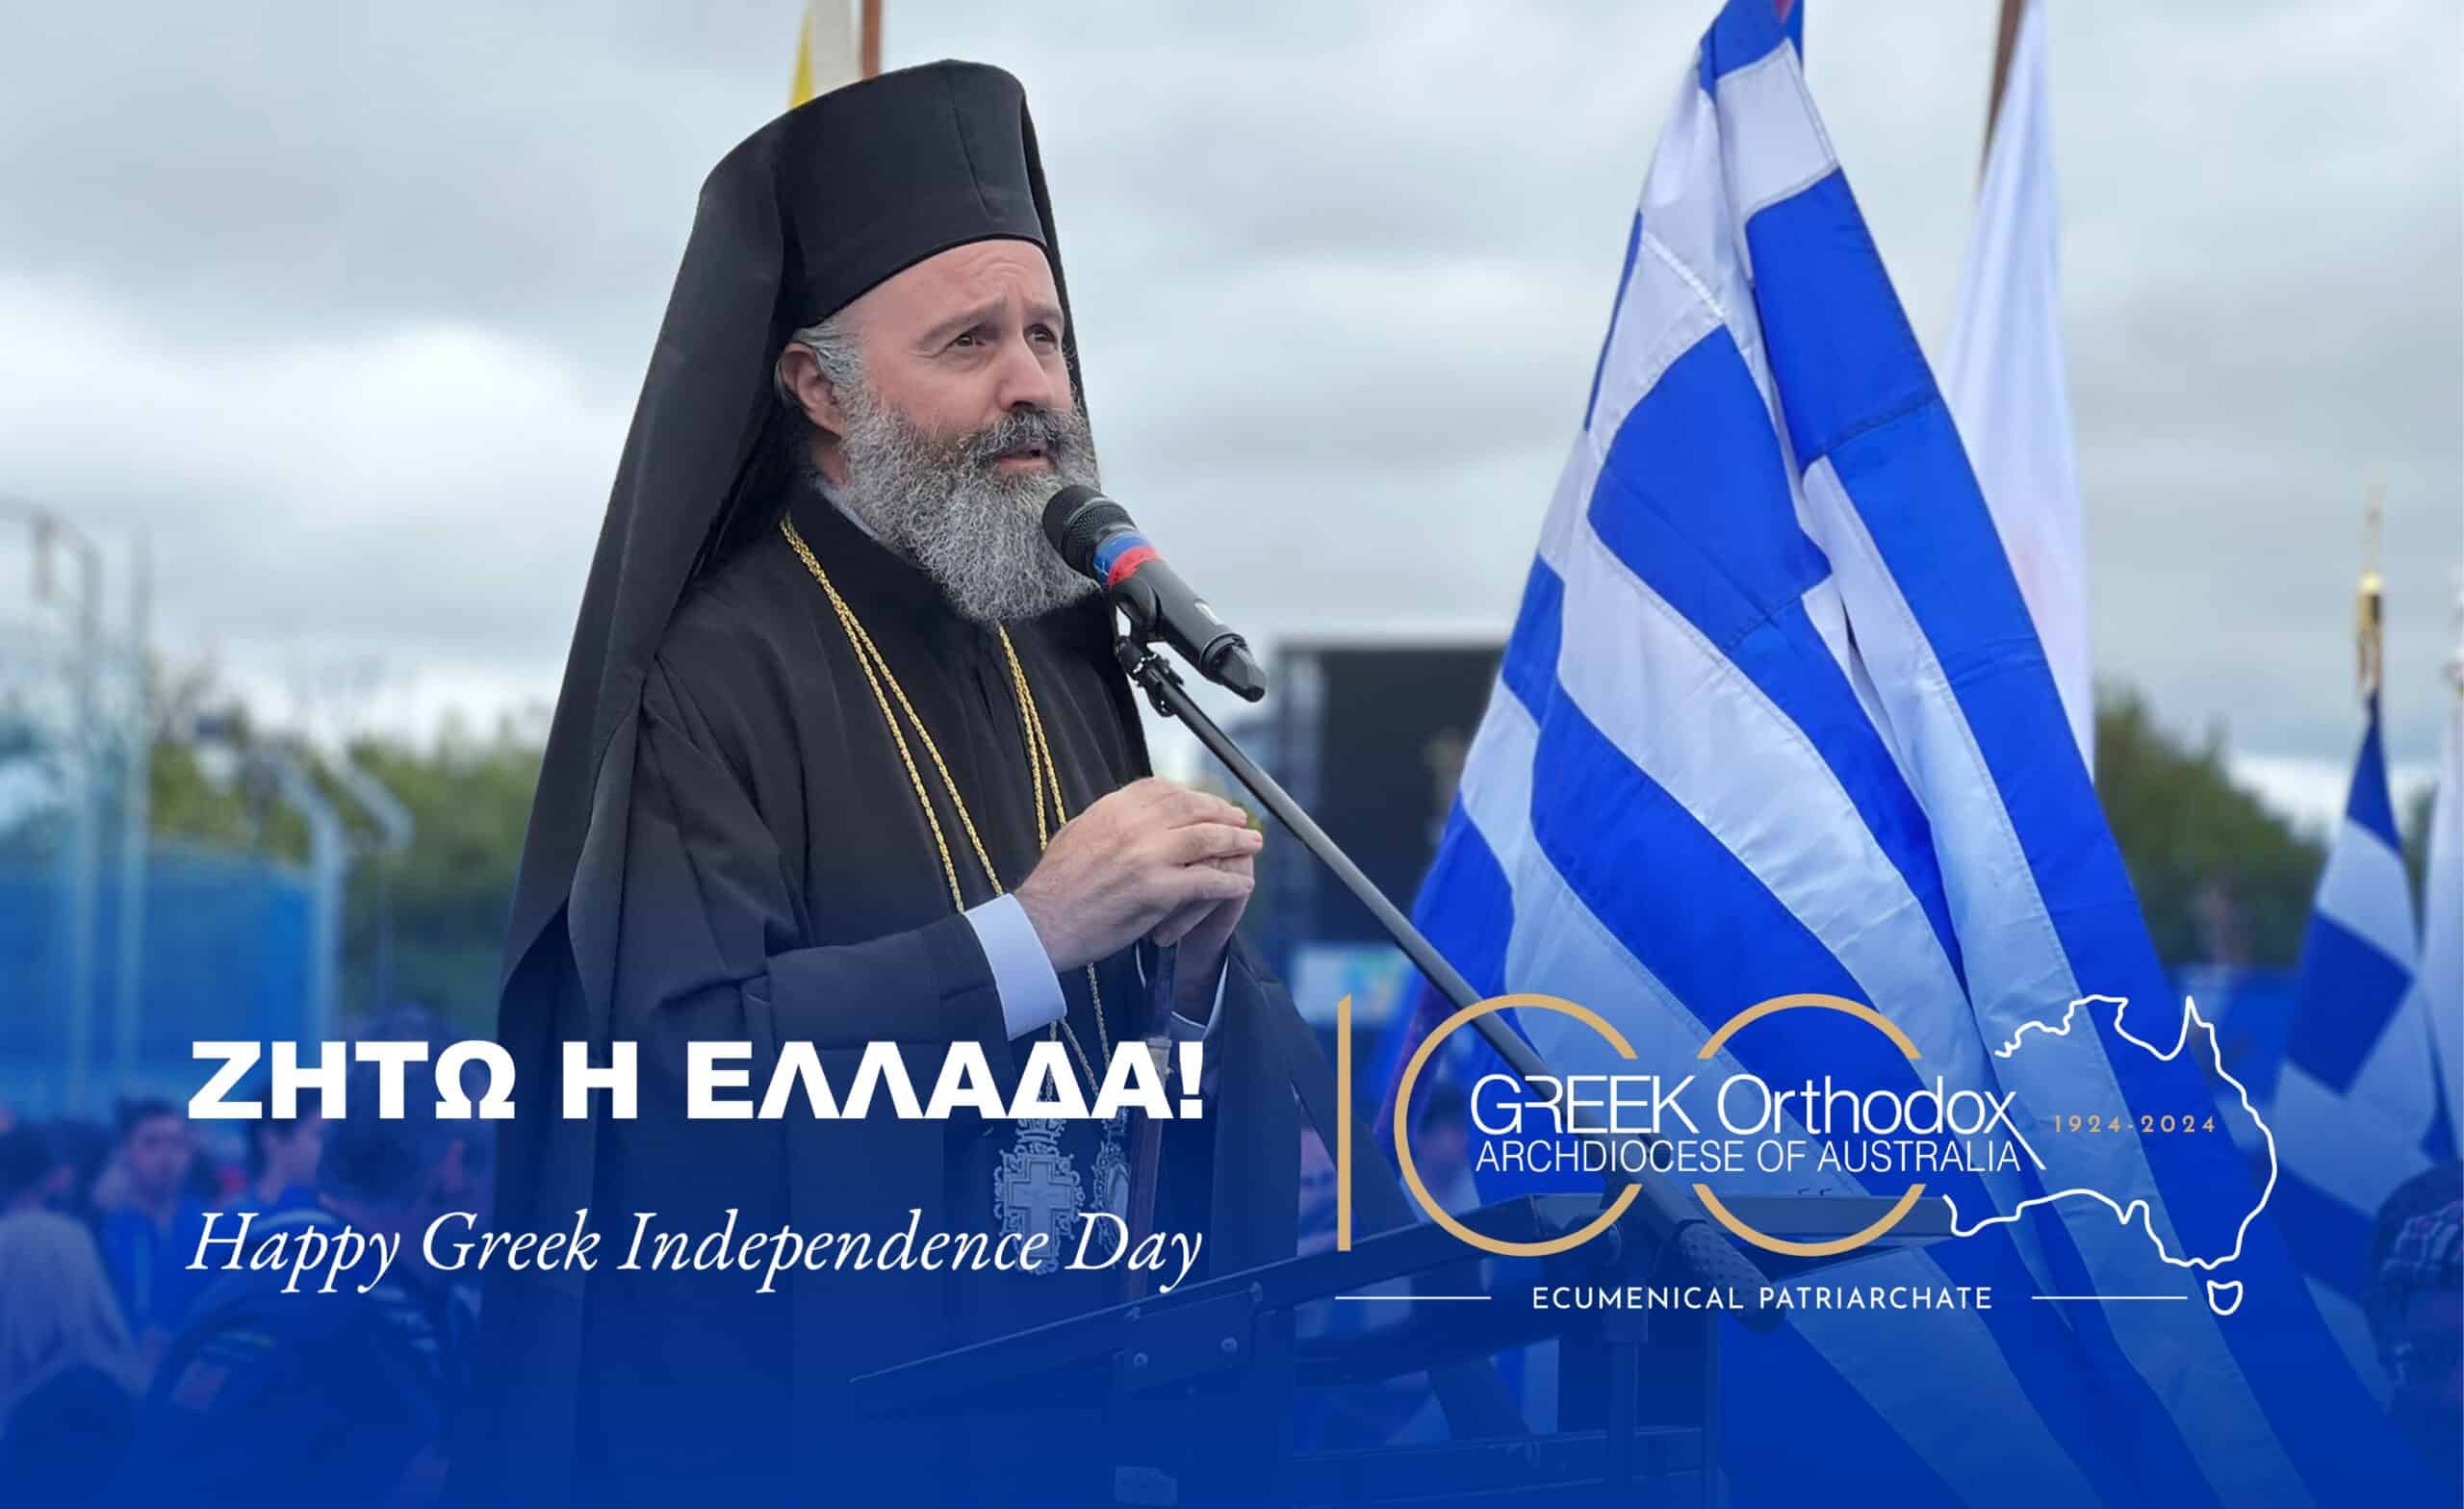 MESSAGE of His Eminence Archbishop Makarios of Australia on the occasion of the Feast Day of the 25th March